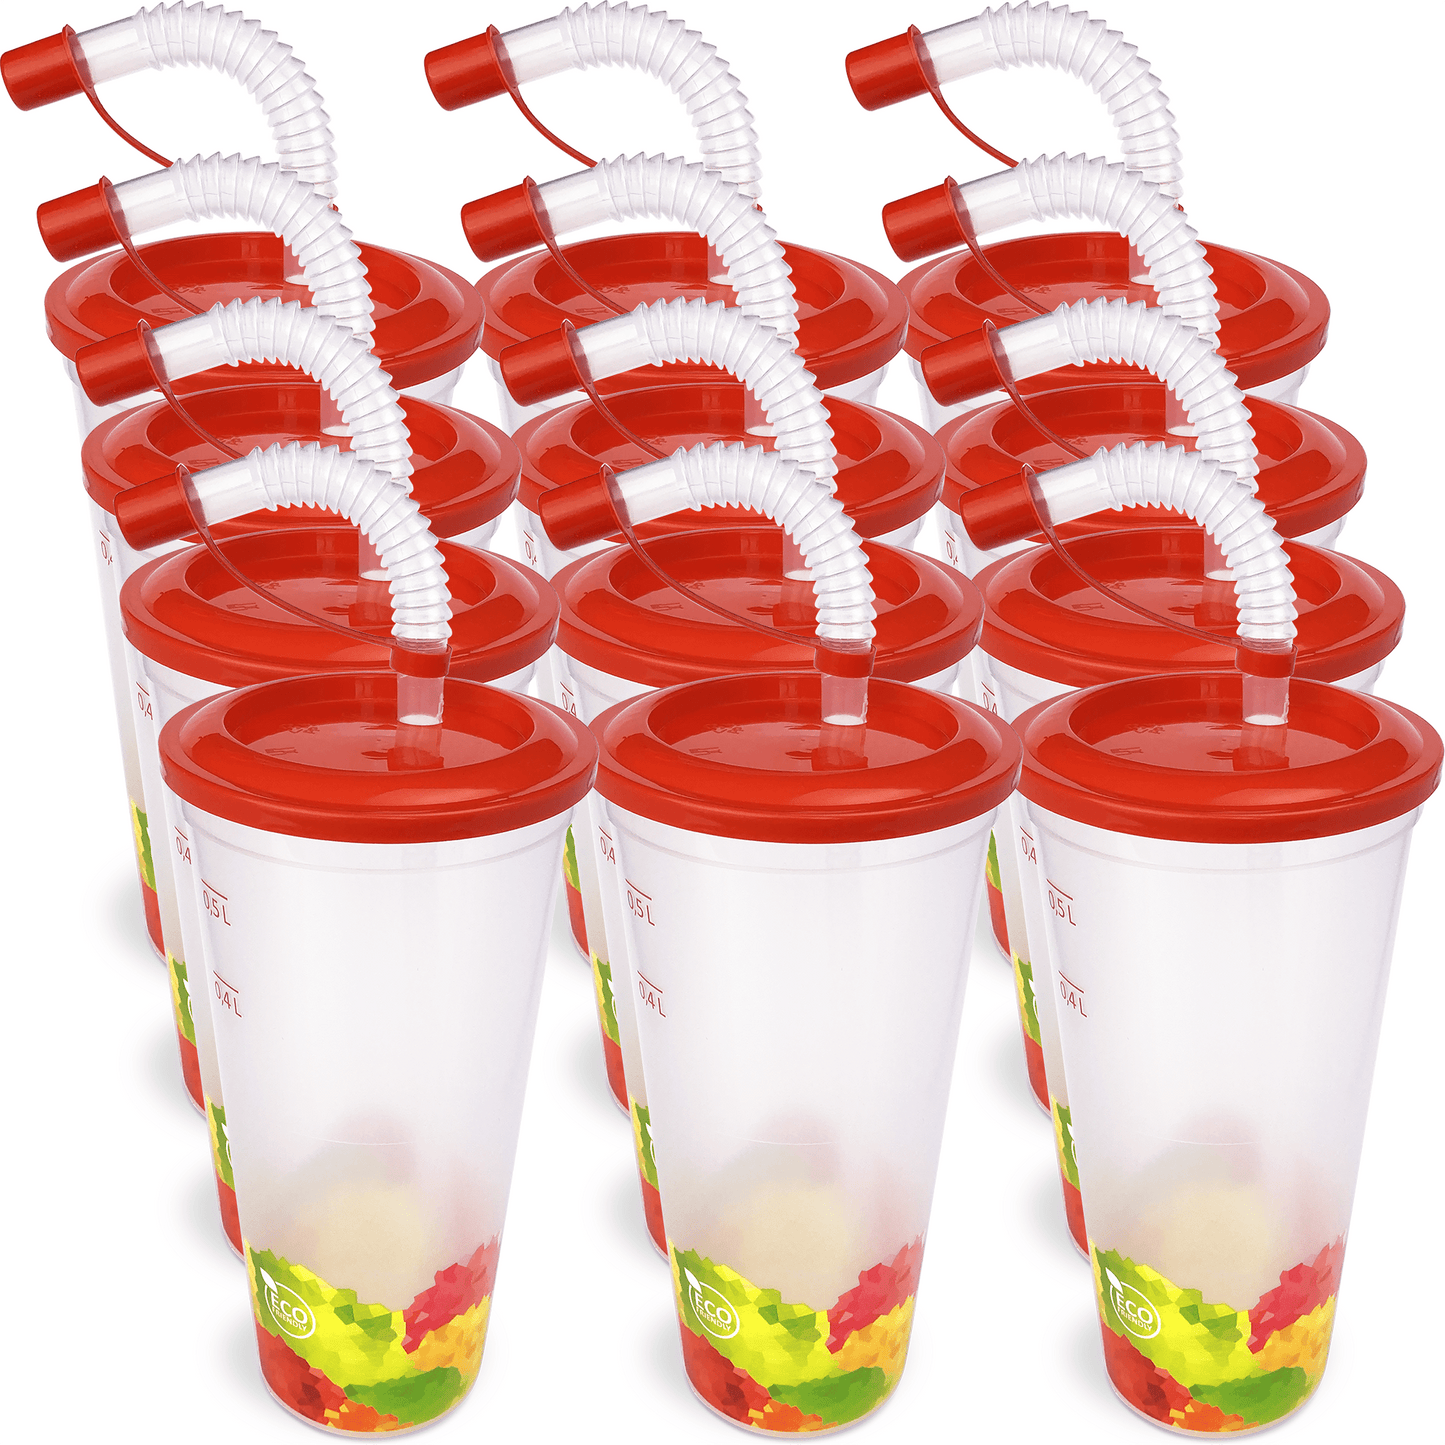 Sweet World USA Tumbler Cups Red Tumbler Cups Party Pack (100 cups) - (17oz./500ml.) cups with lids and straws